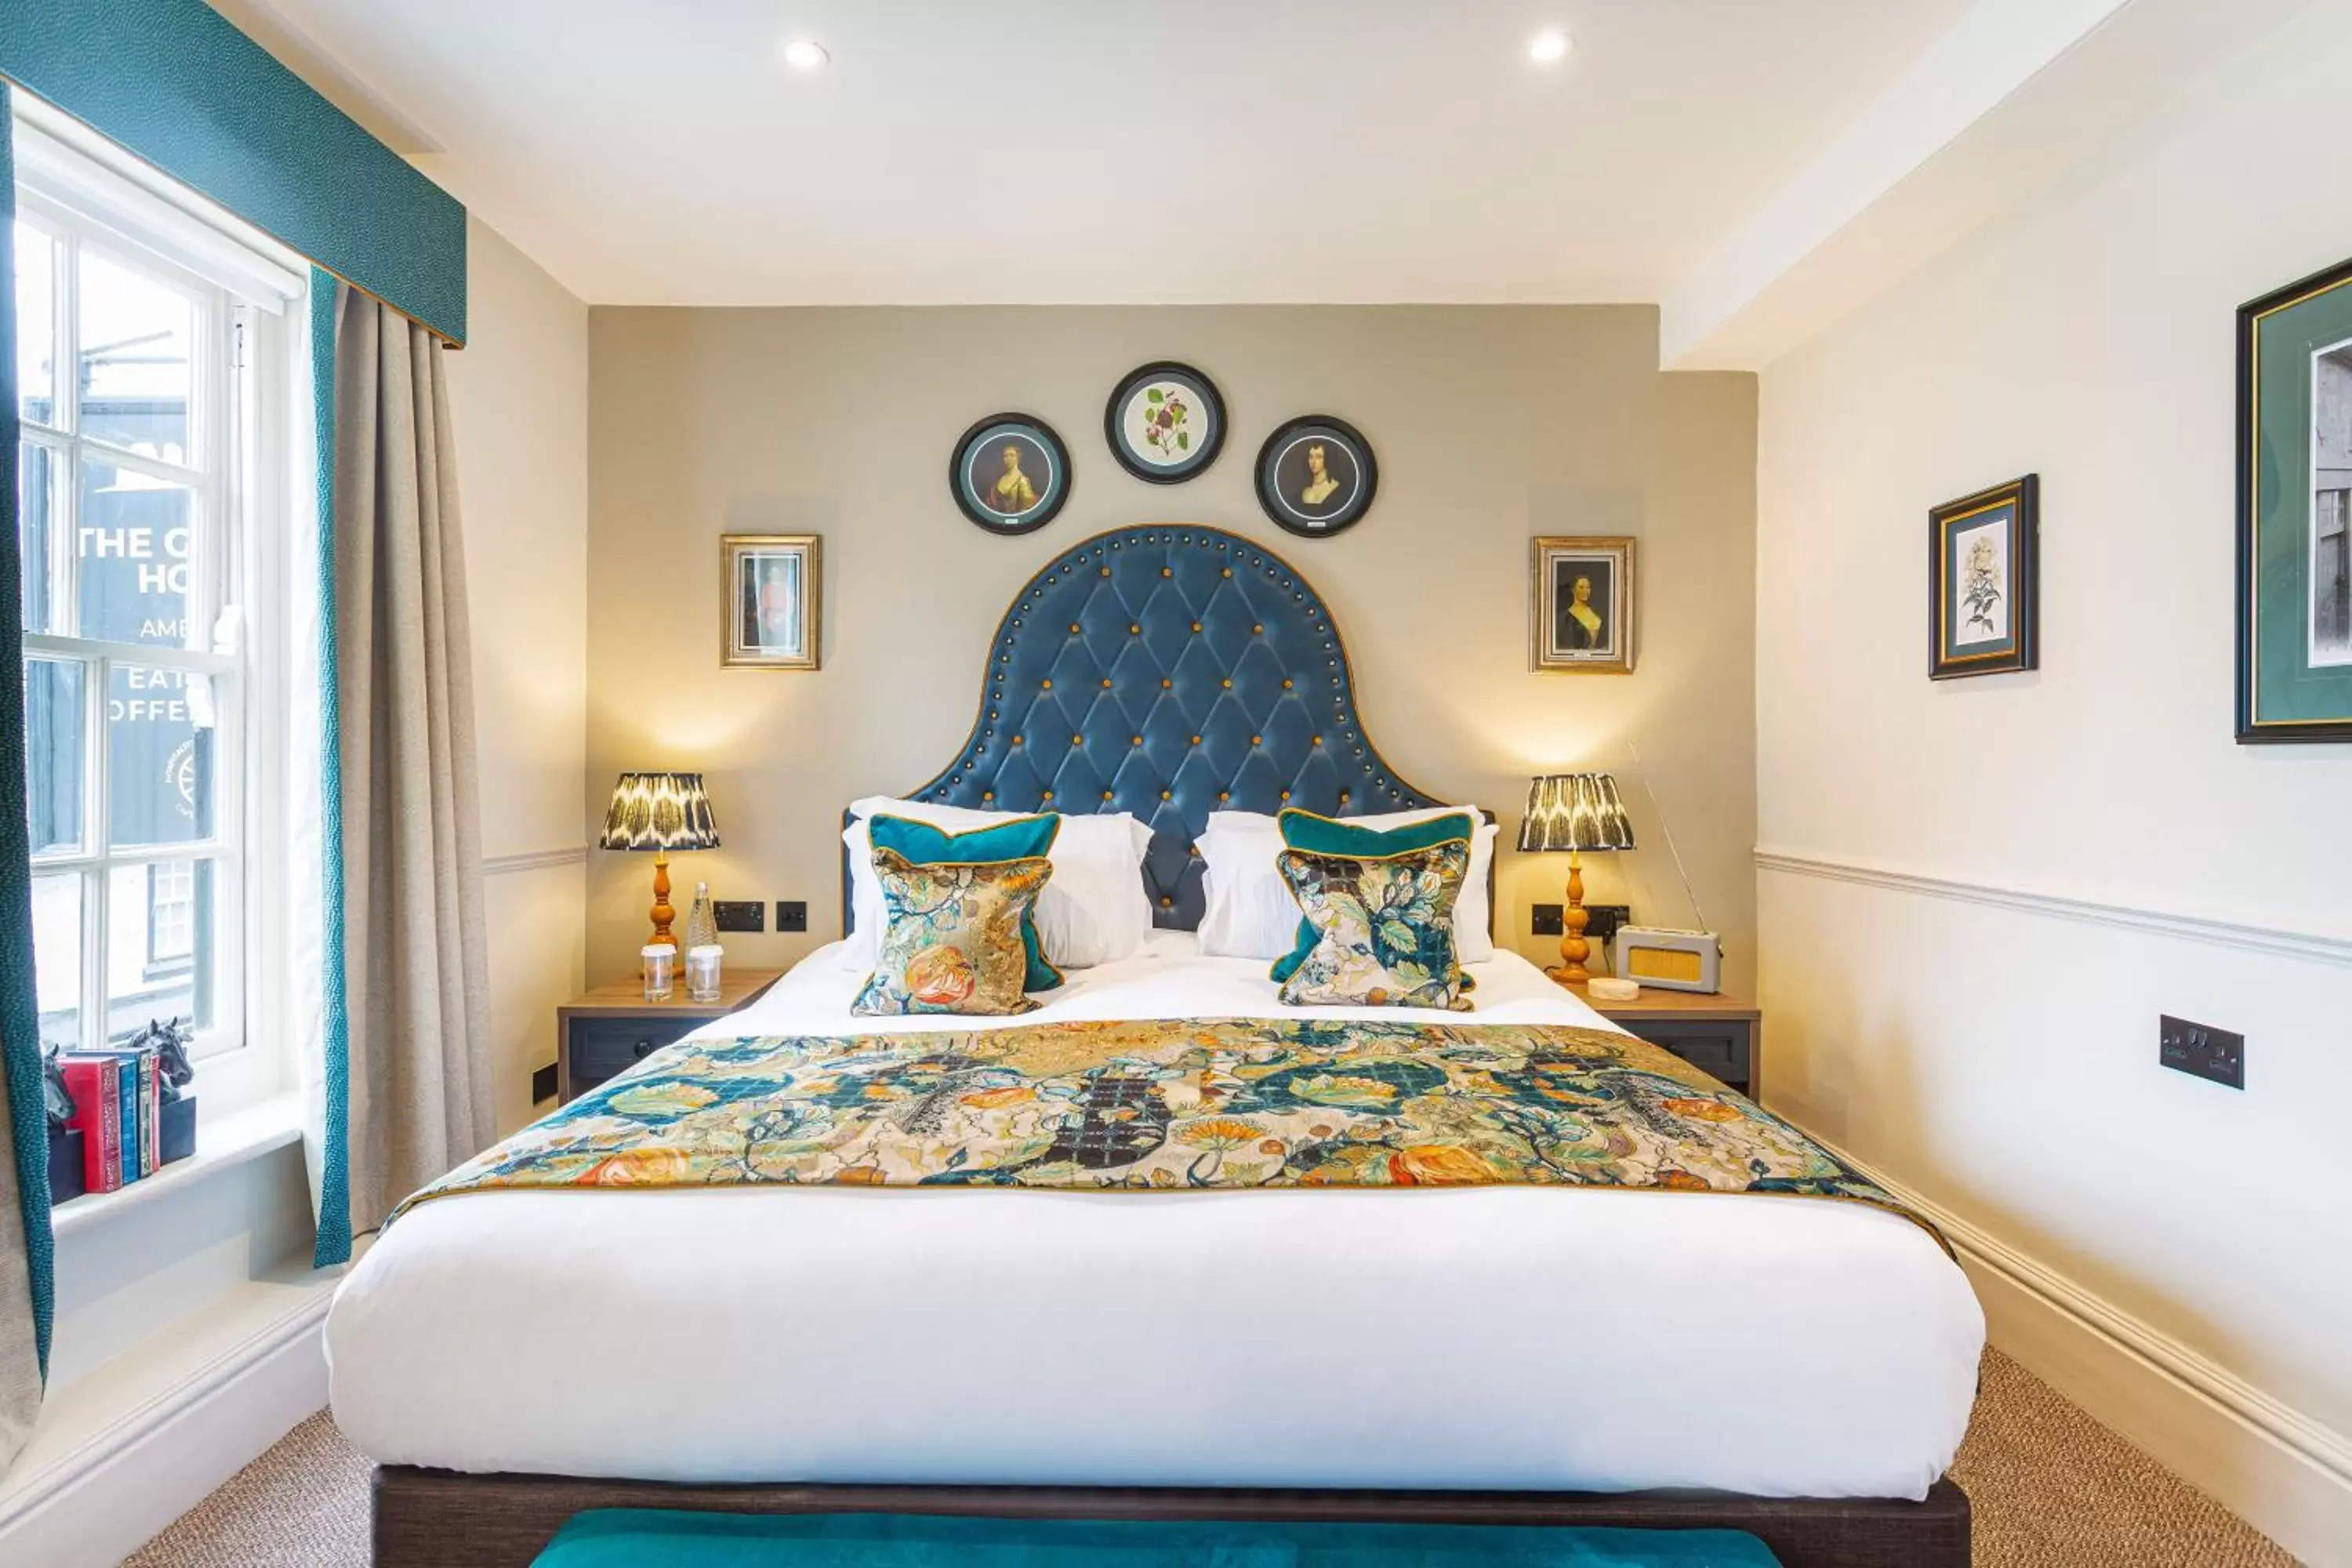 Bed in The George Hotel, Amesbury, Wiltshire